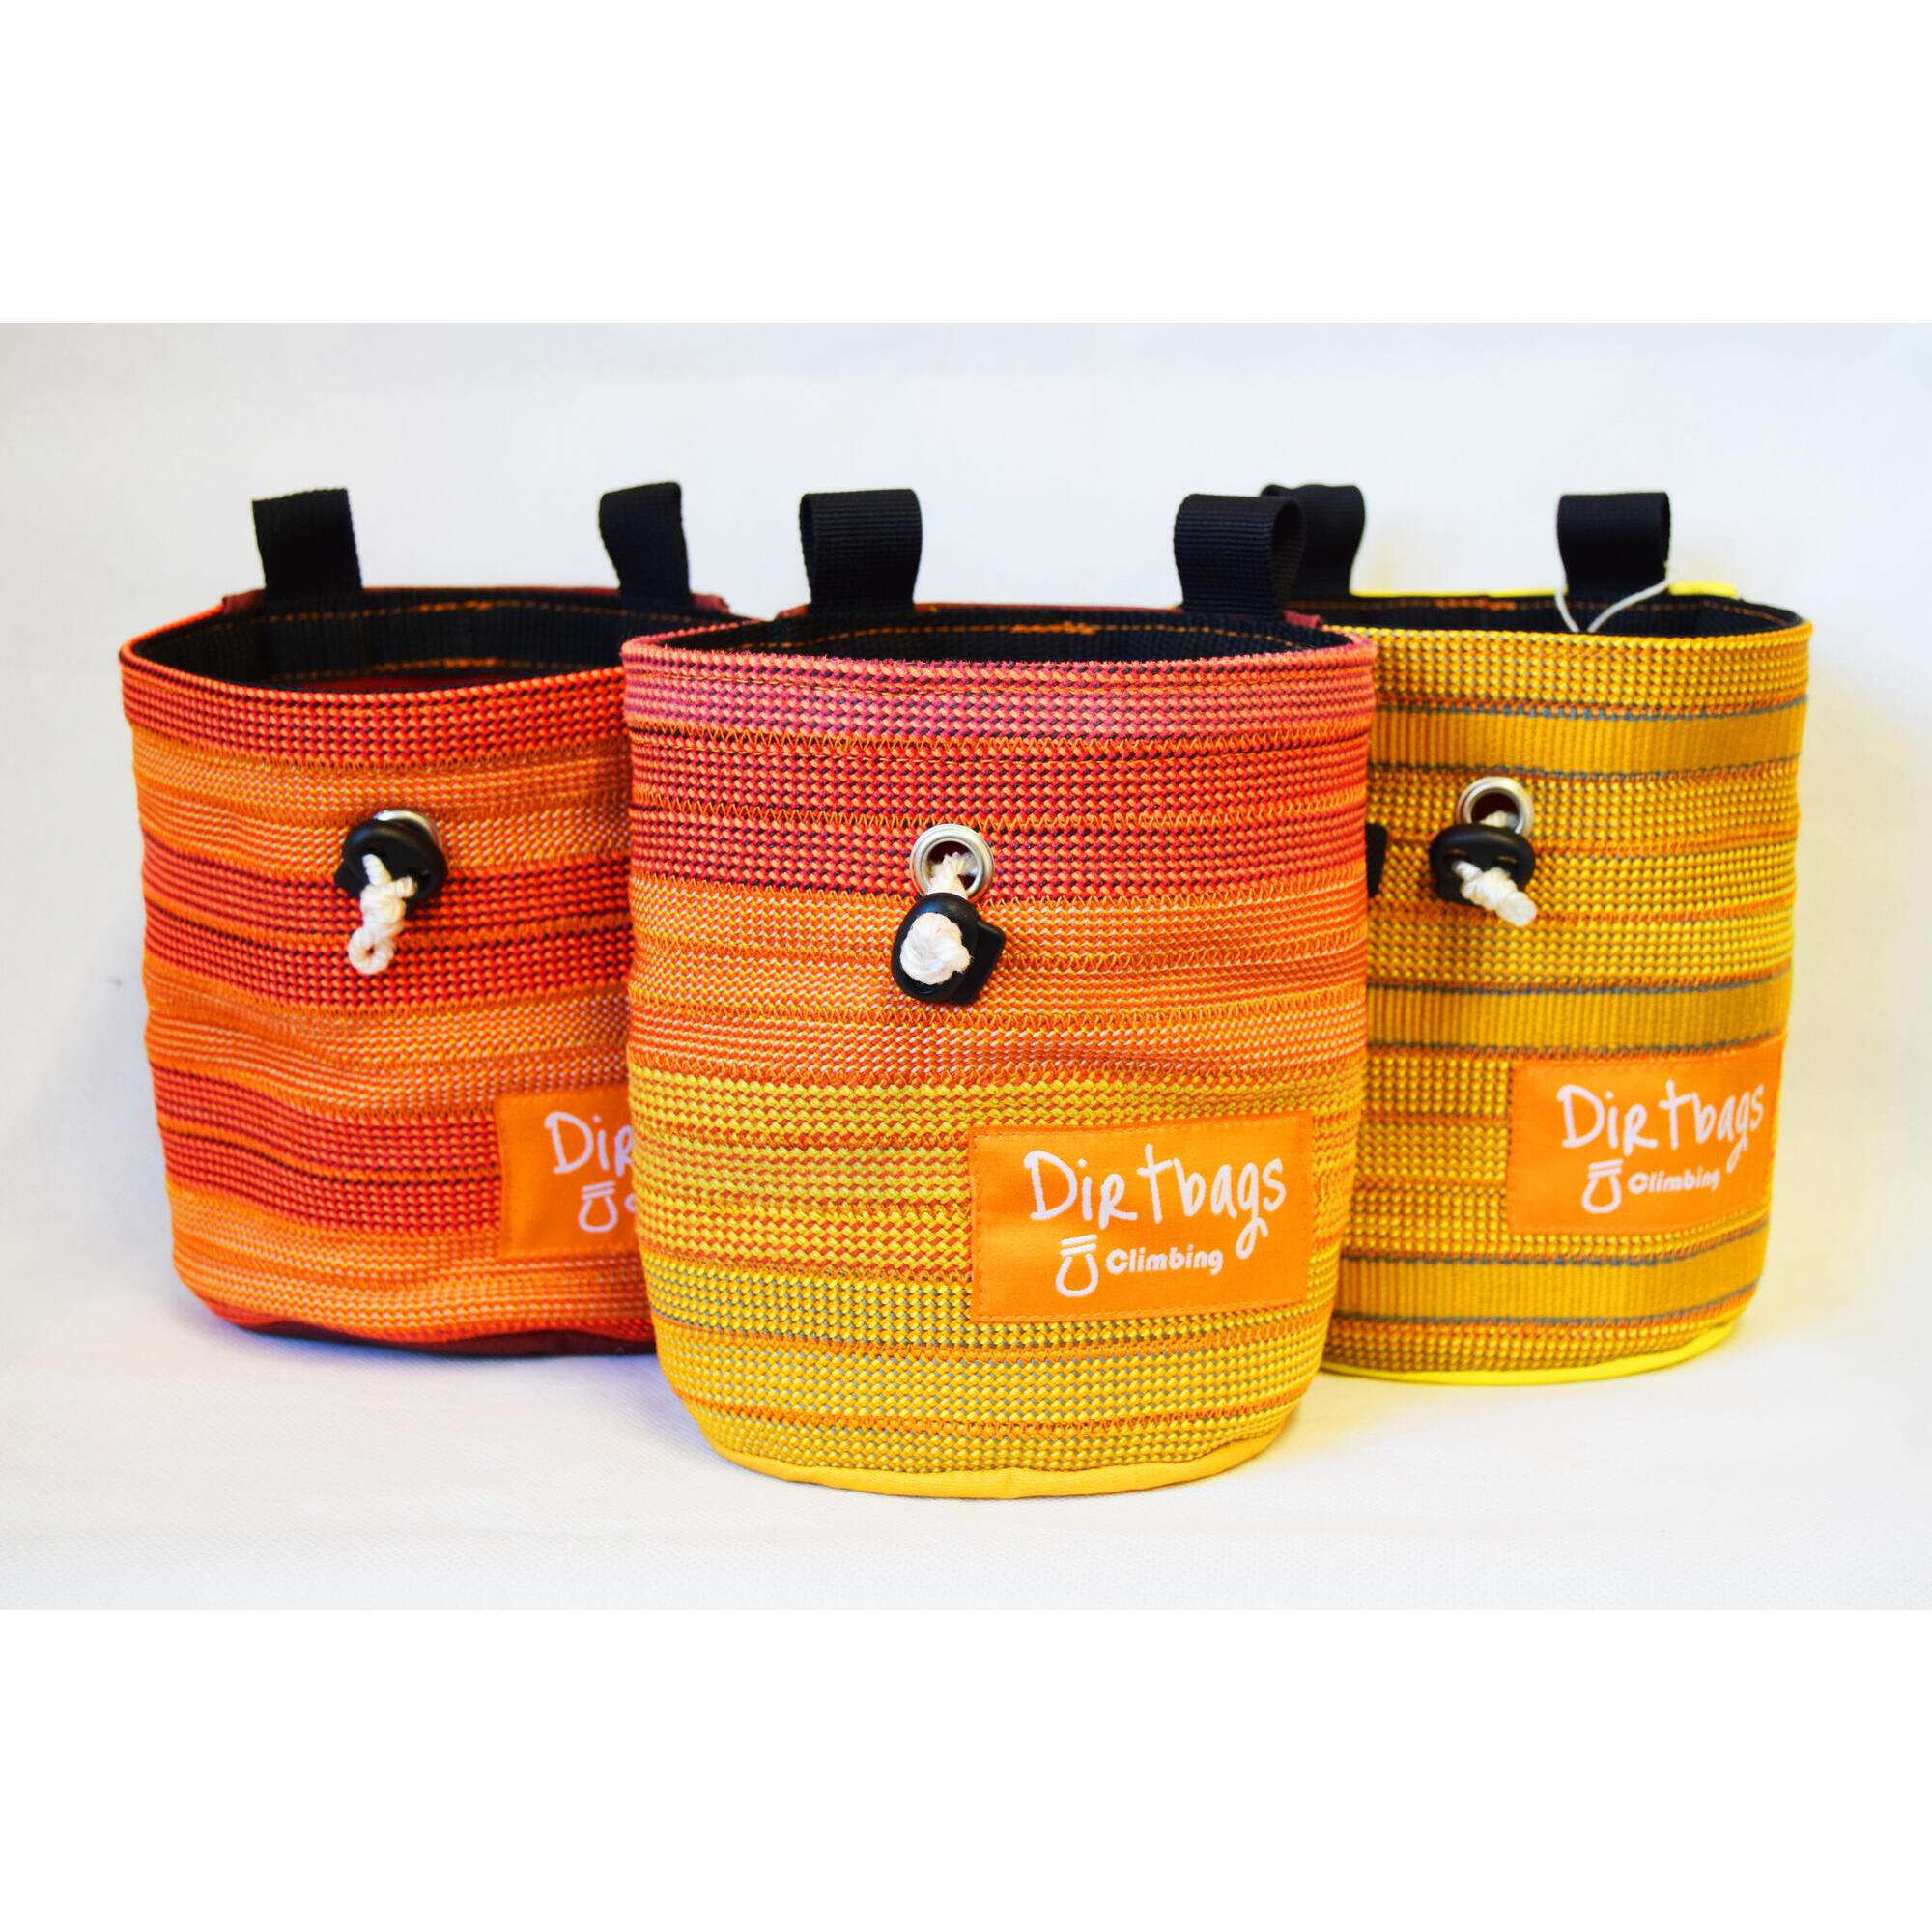 DIRTBAGS CLIMBING Recycled climbing rope chalk bag, made in the UK / Orange